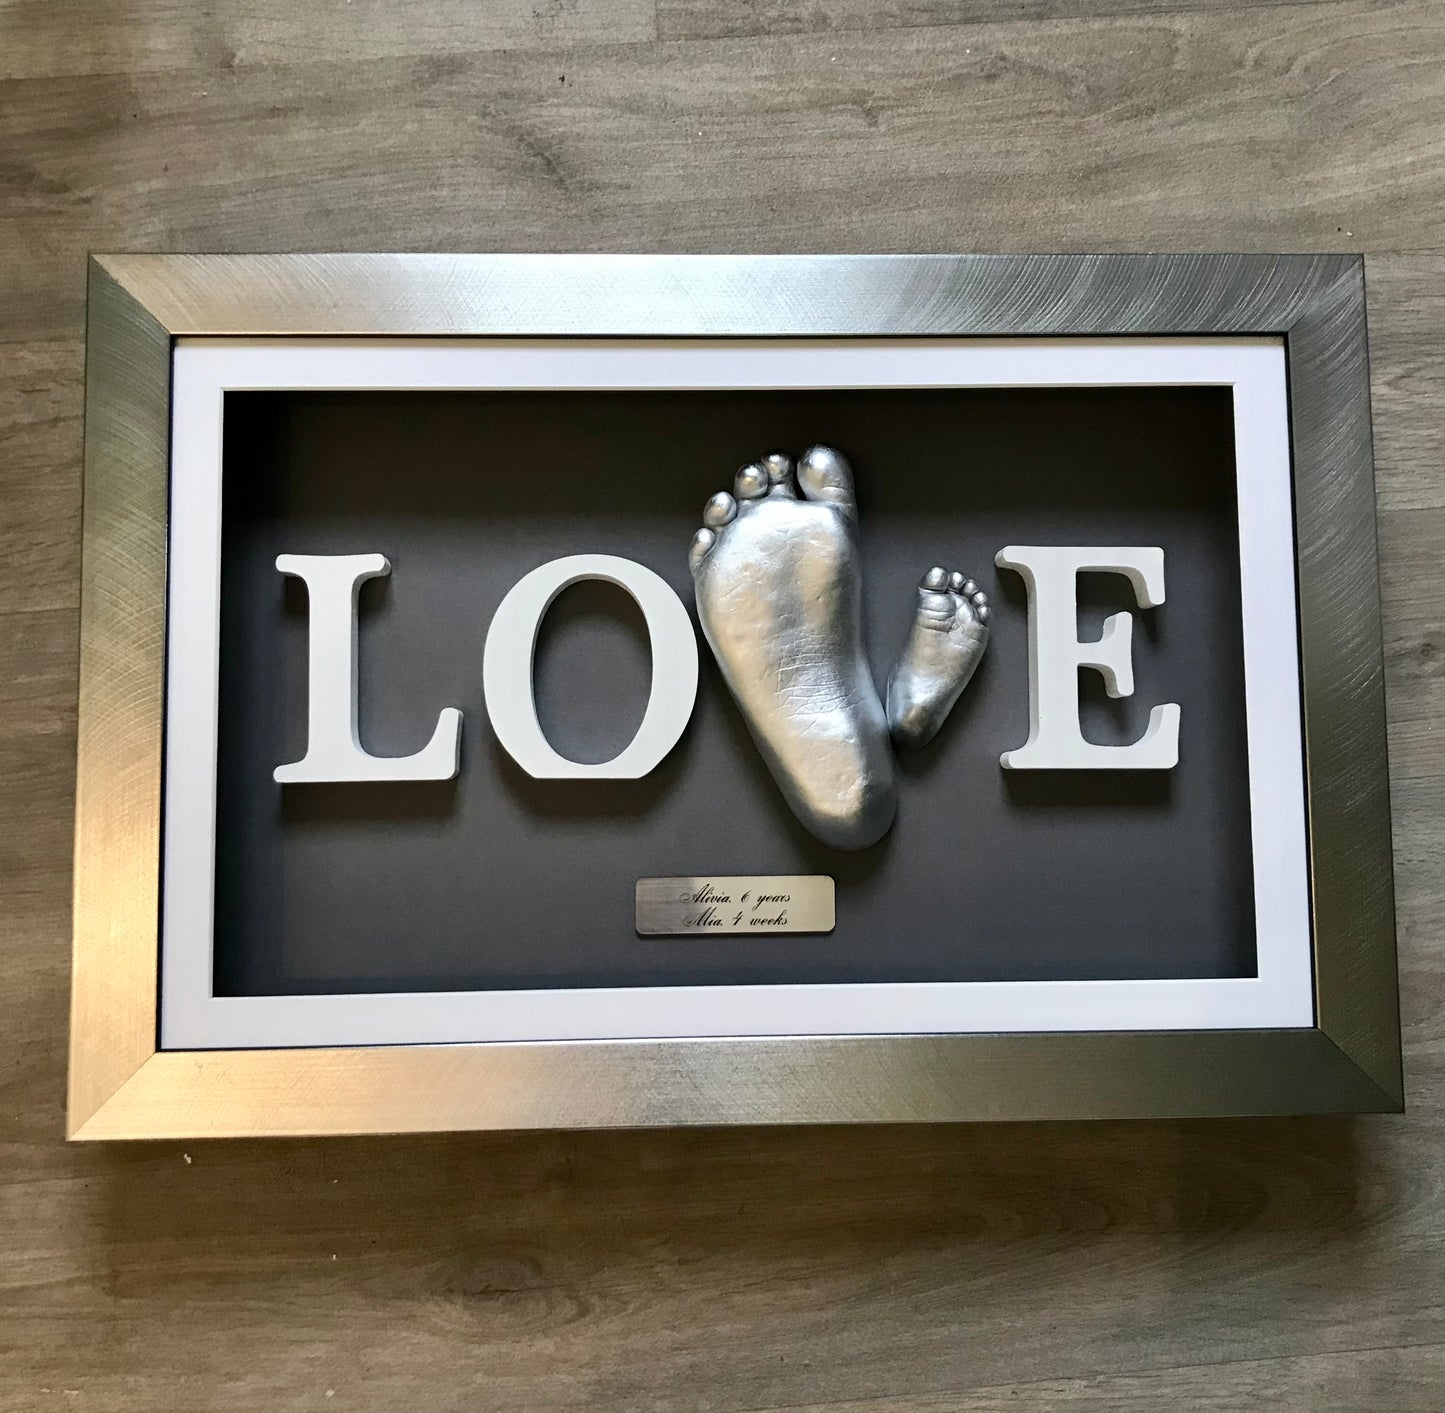 3D Framed Casts With 'LOVE' Letters